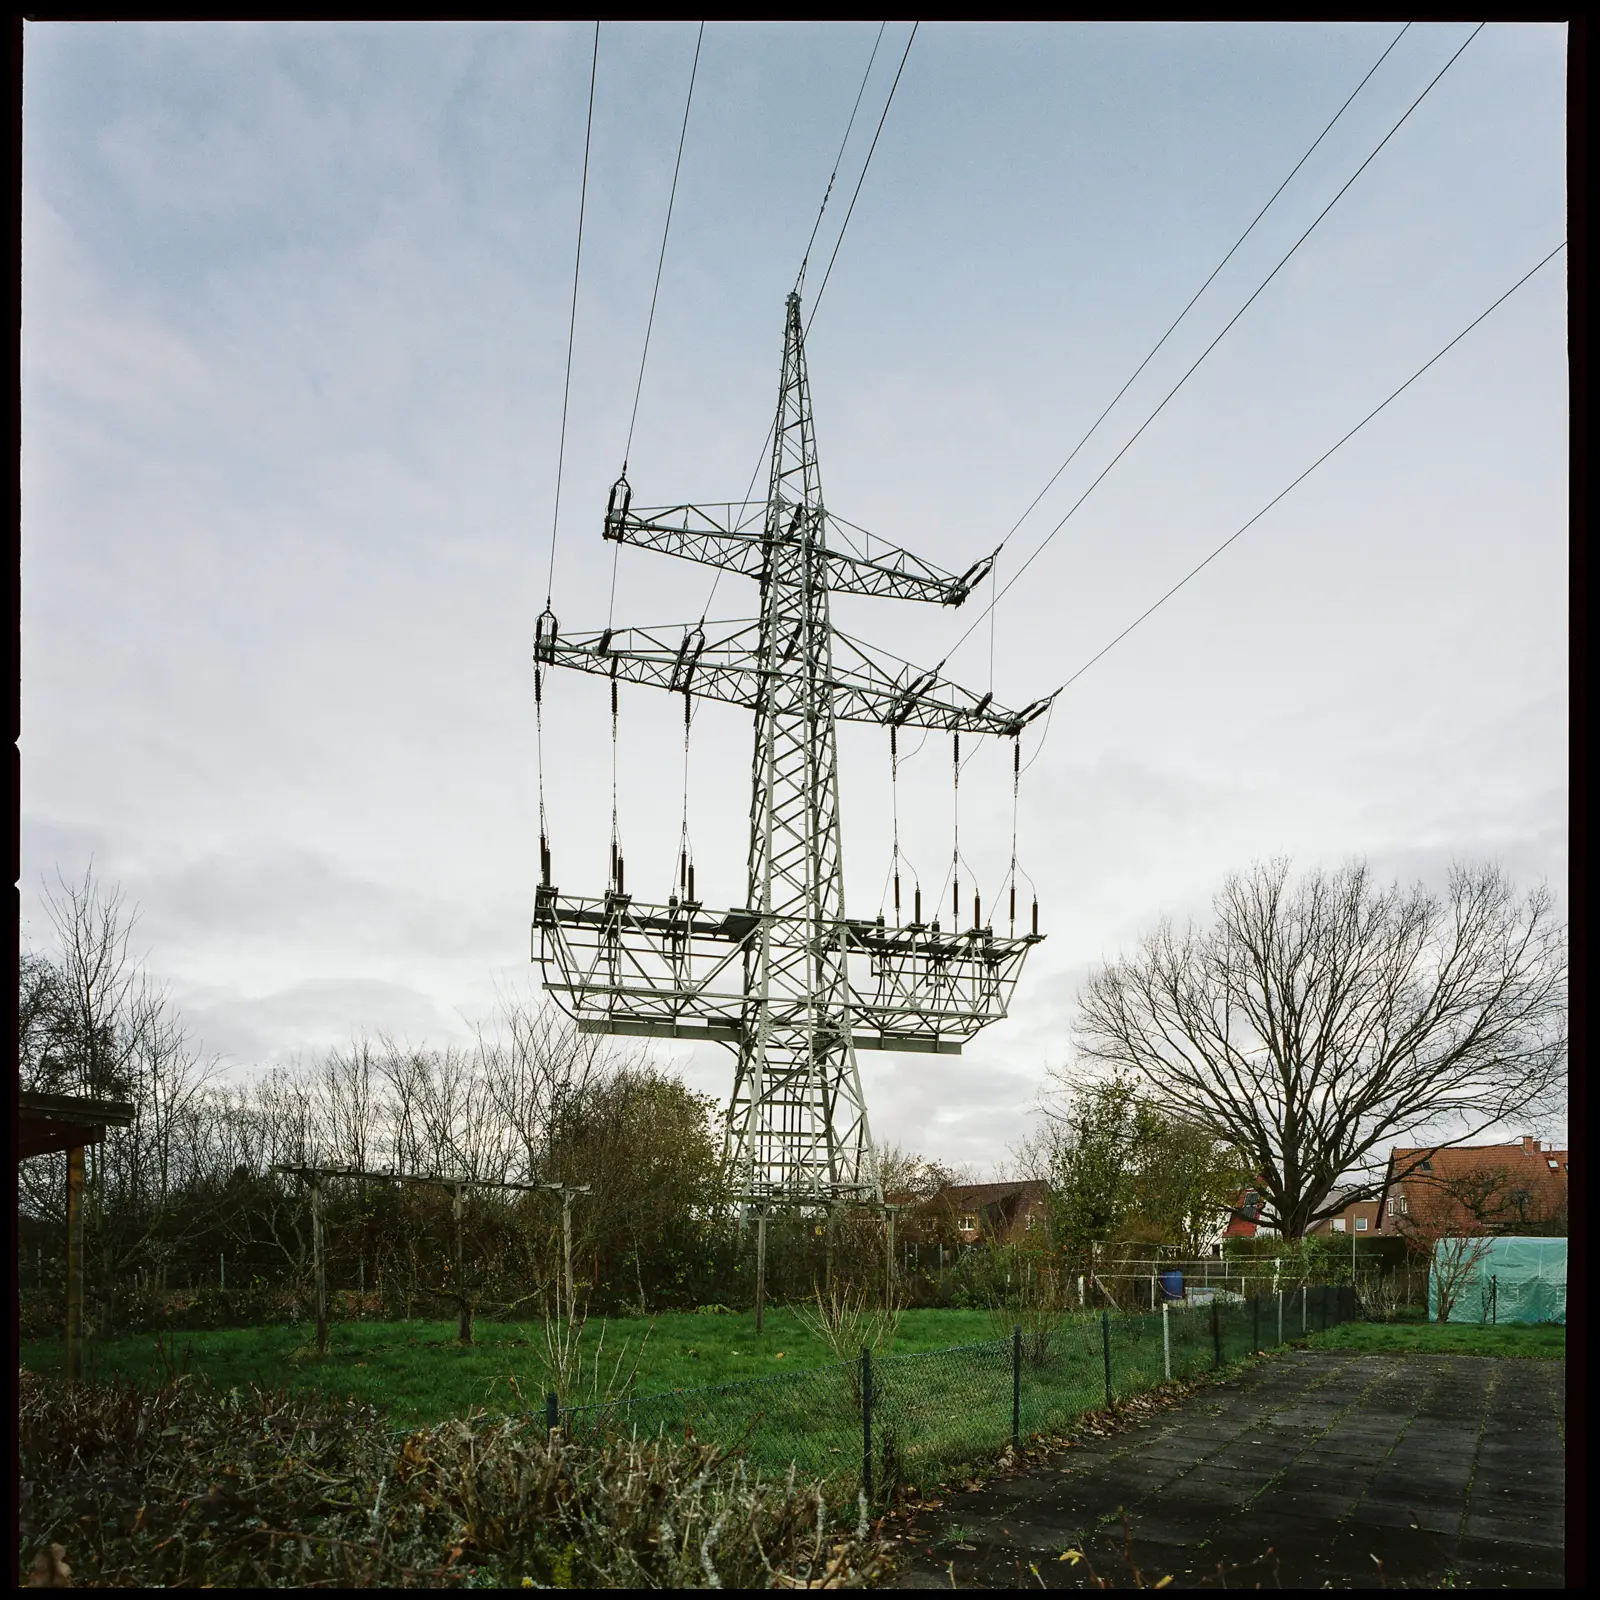 6x6 photograph of a large powerpole in front of a slightly cloudy evening sky